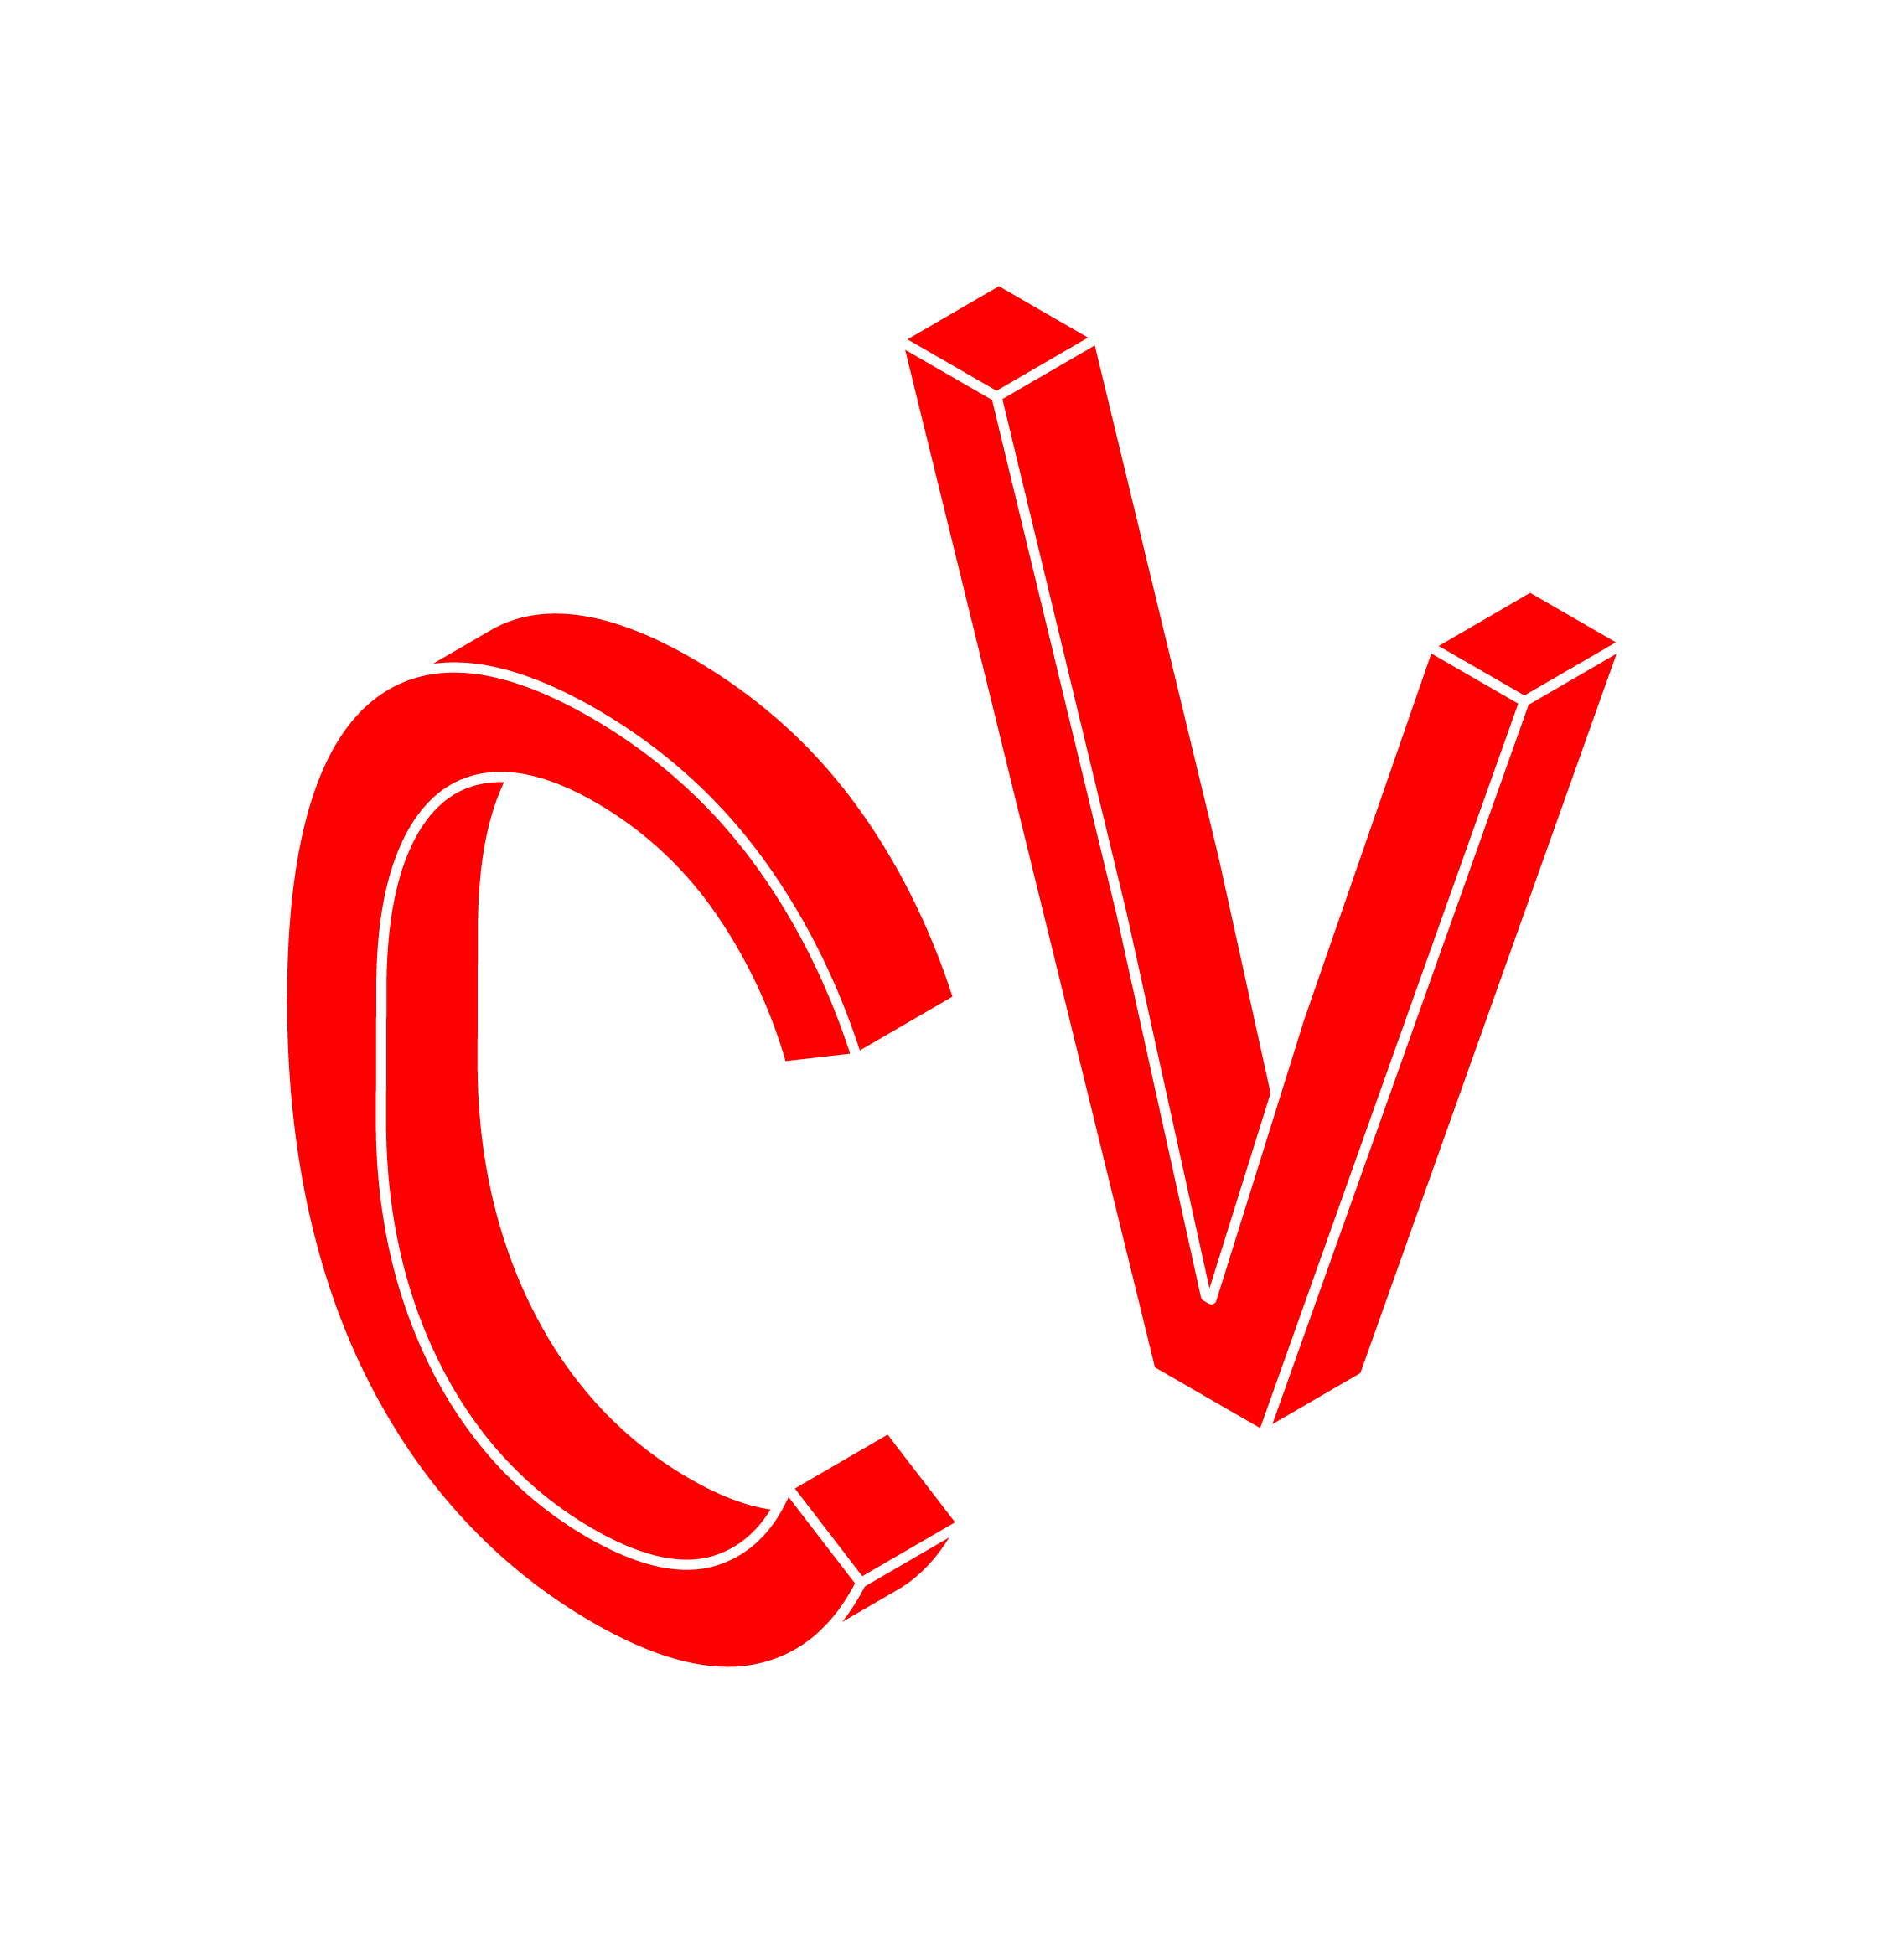 Climate vanguard assets main logo red